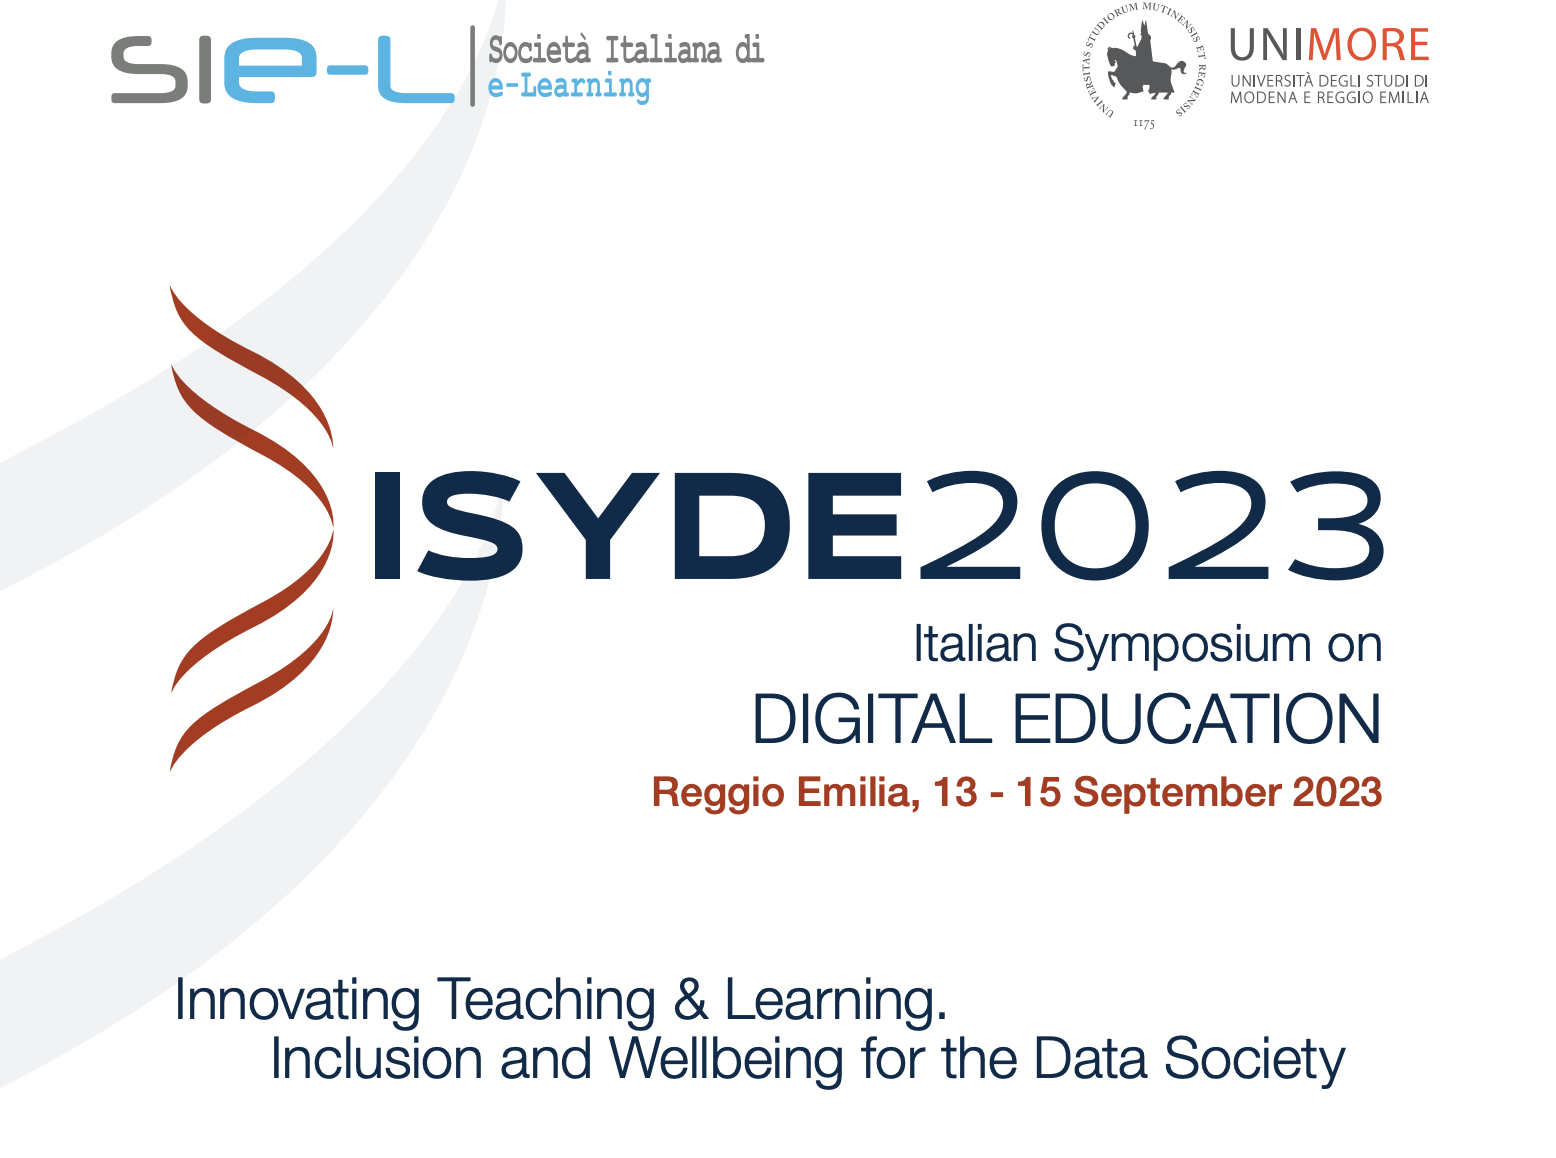 CREMIT research at ISYDE, Italian SYmposium on Digital Education